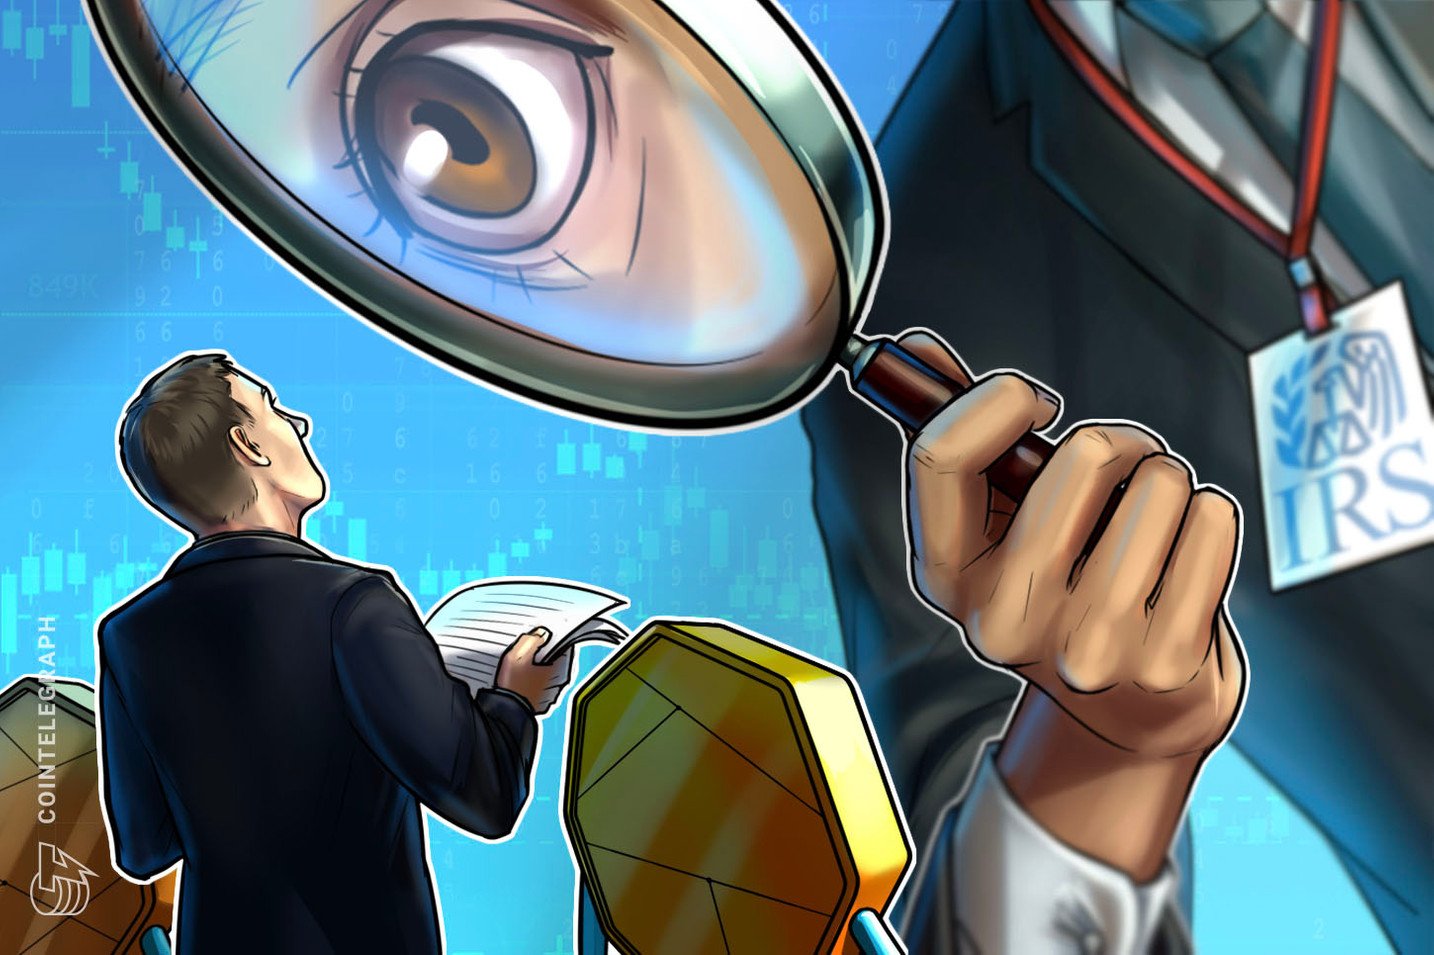 IRS clarifies reporting requirements for crypto bought with fiat